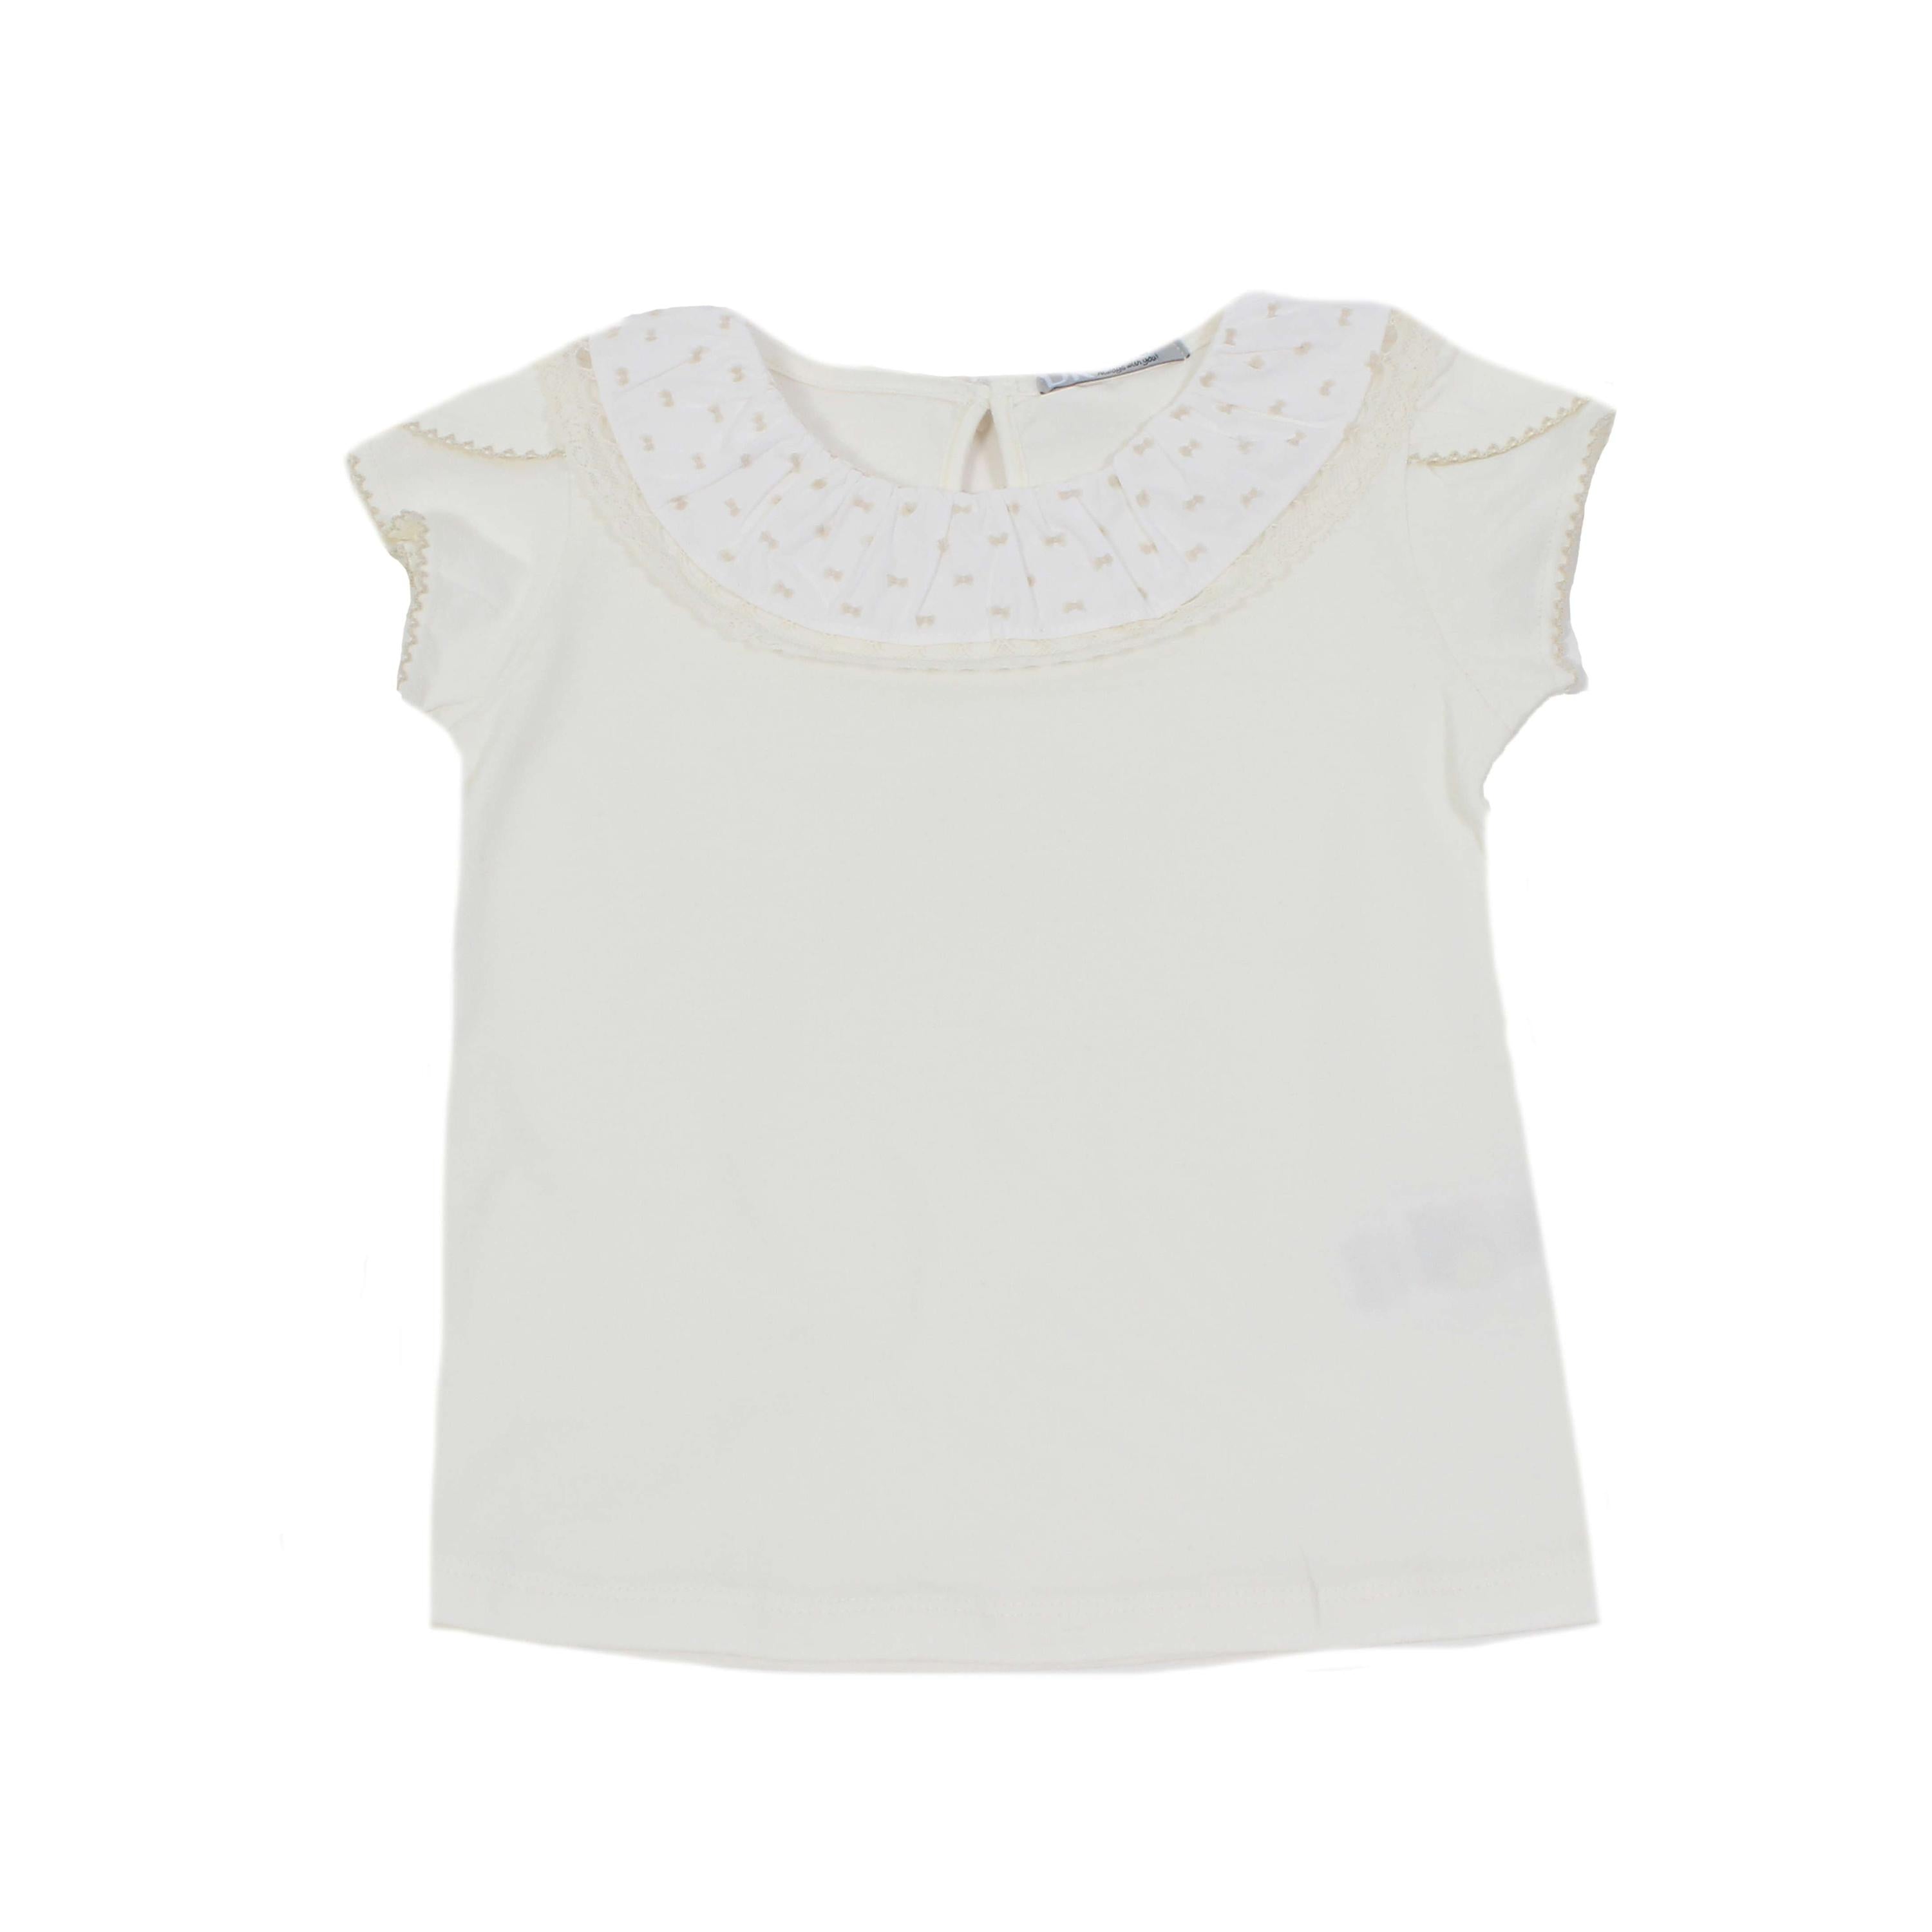 Maglia In Cotone Con Pizzo Panna Bambina DR KID DK474 - DR.KID - LuxuryKids